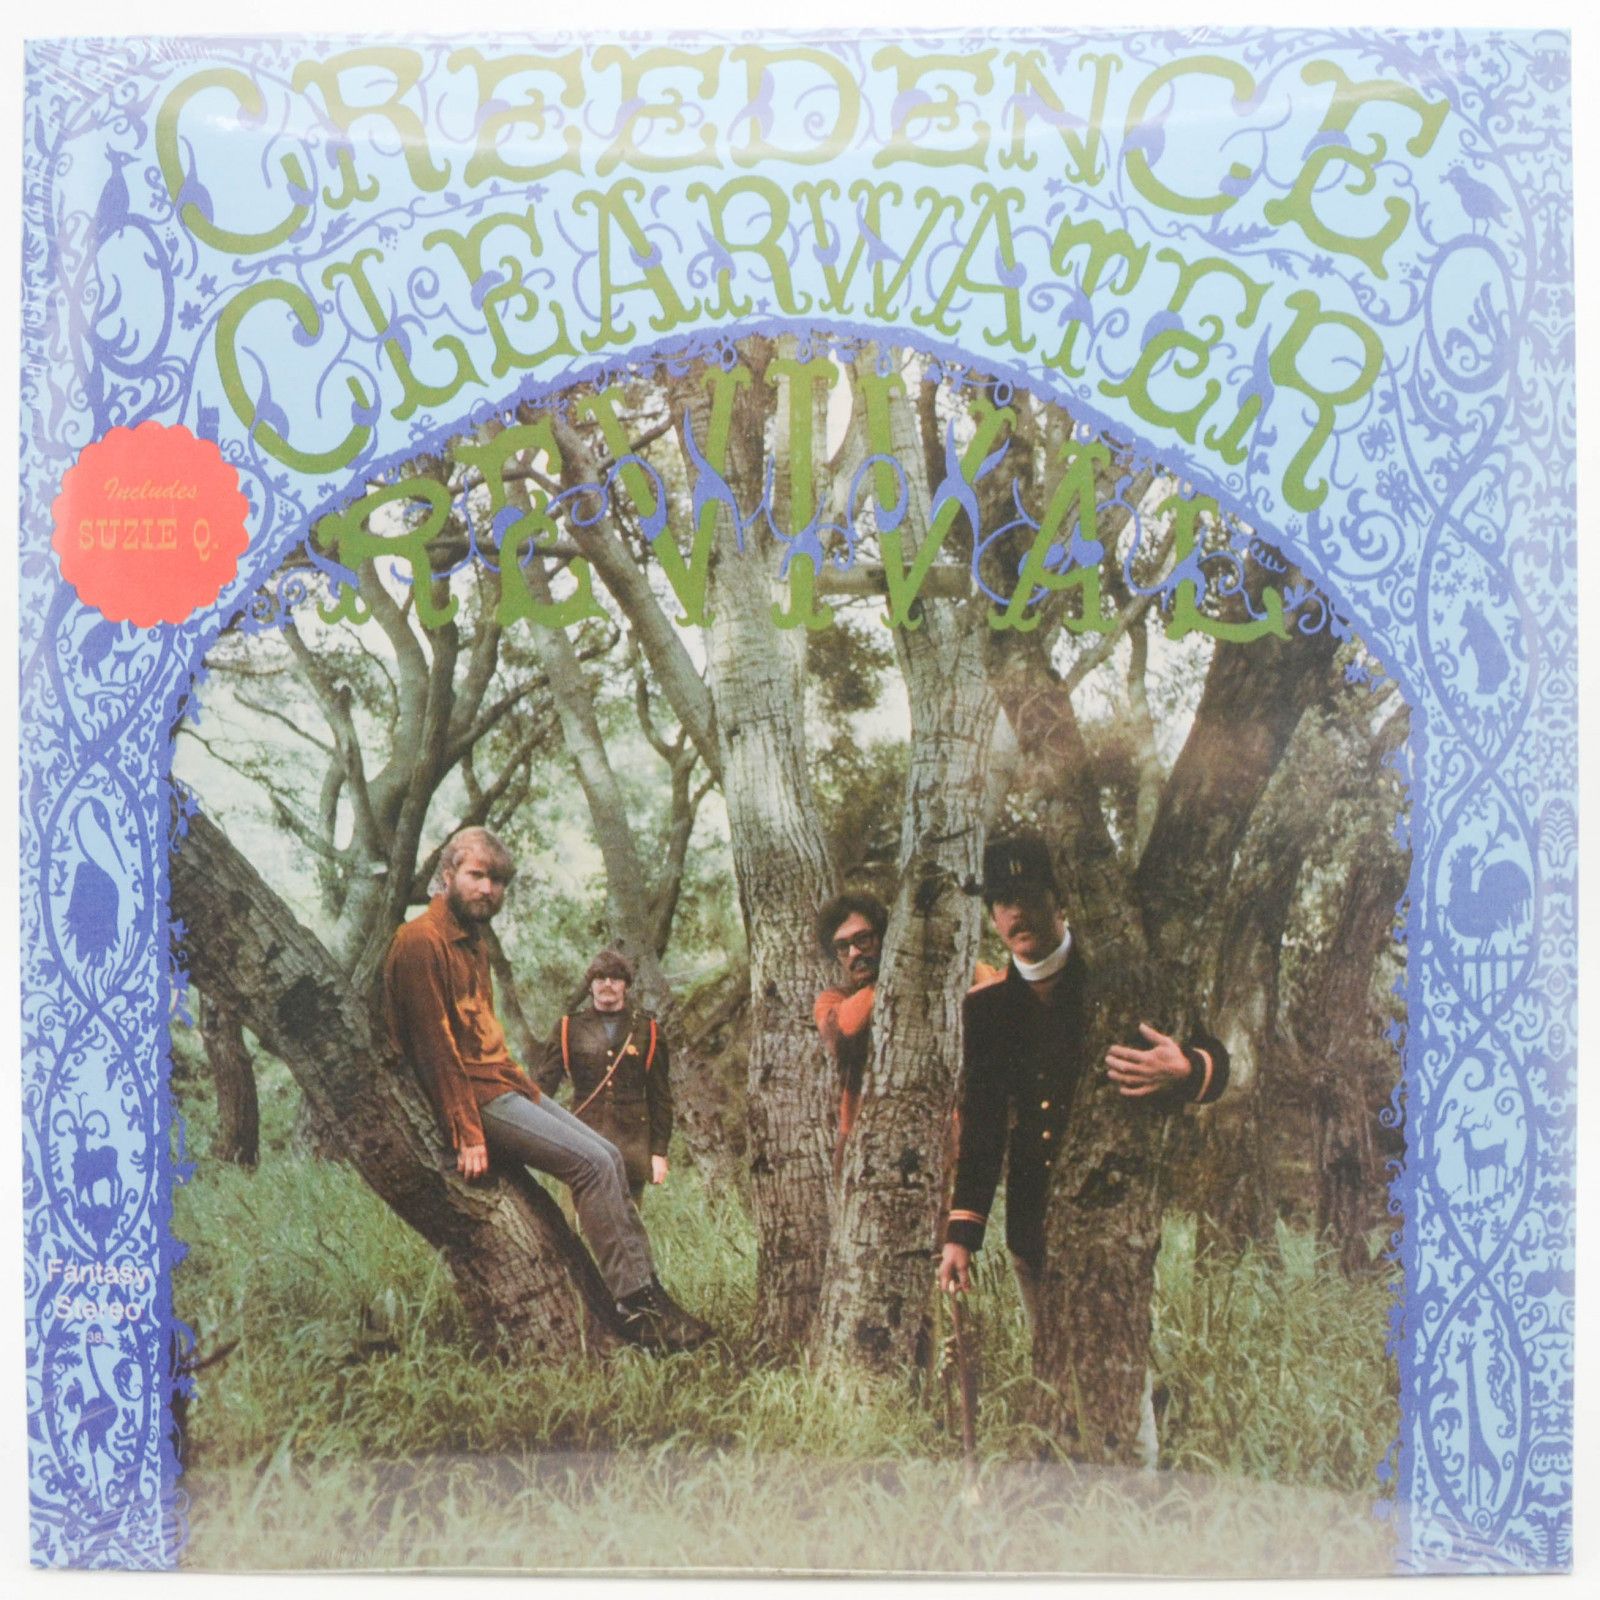 Creedence Clearwater Revival — Creedence Clearwater Revival, 1968